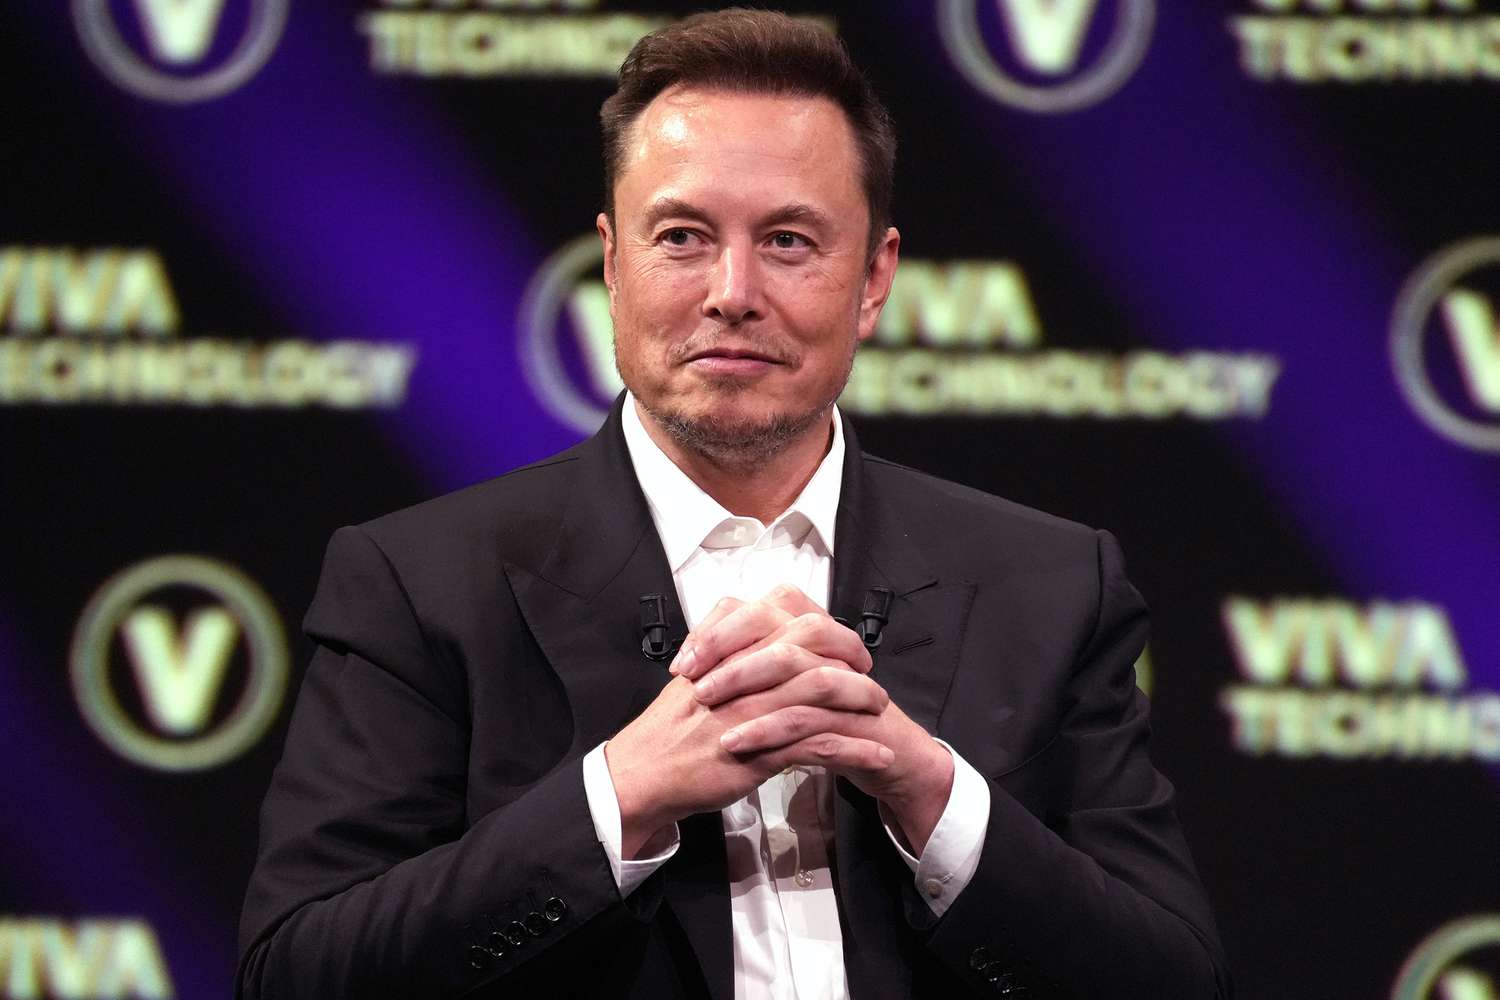 Is Elon Musk Jewish, Christian or does he follow any other religion?